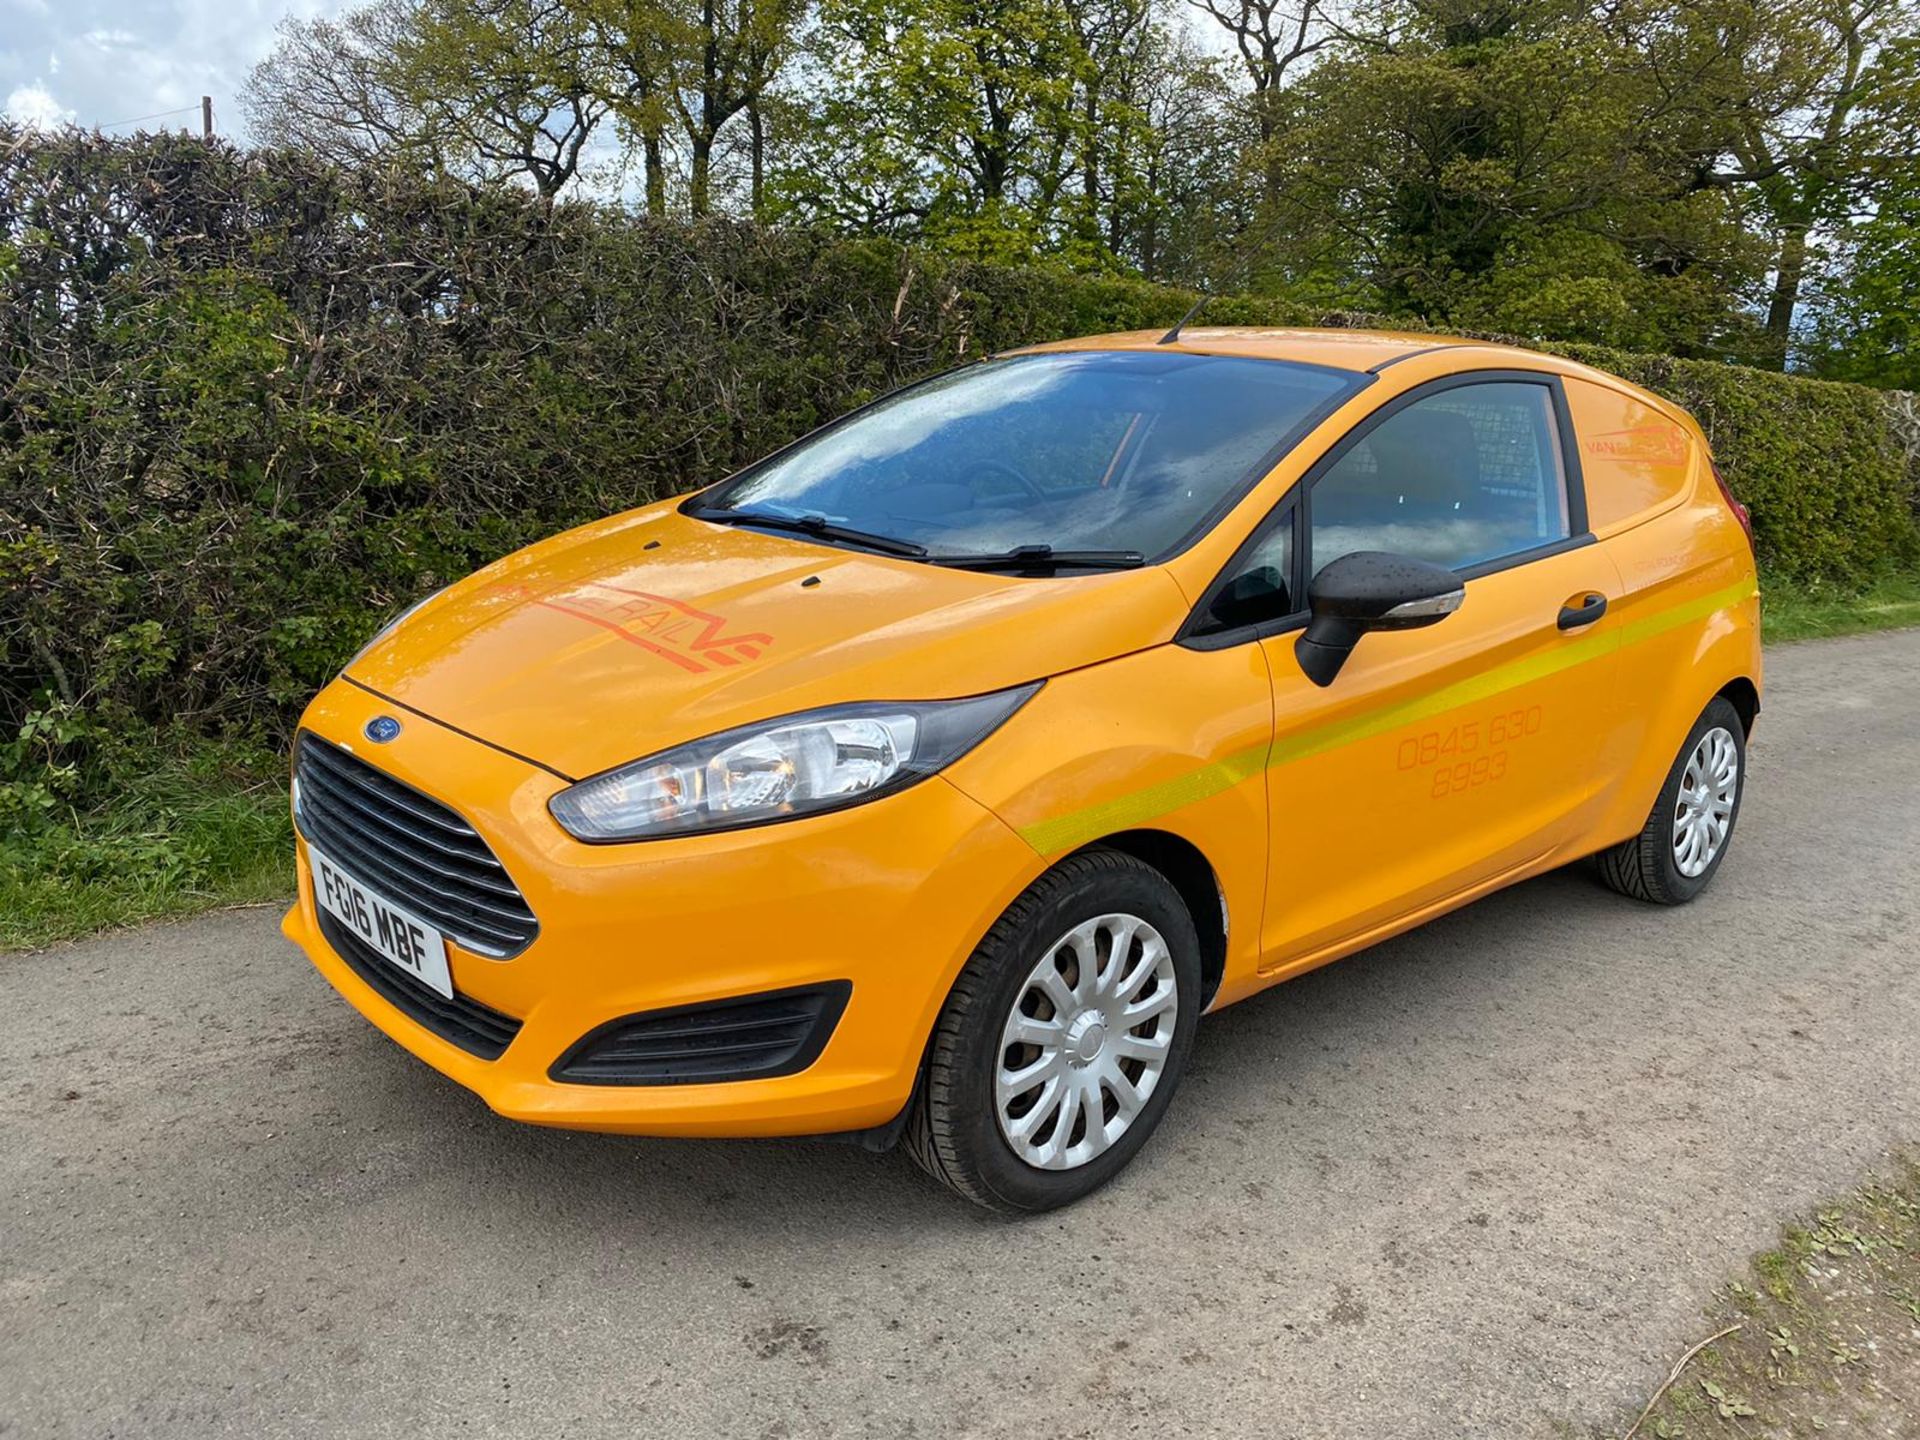 2016 FORD FIESTA BASE 1.5 TDCI LOCATION NORTH YORKSHIRE - Image 4 of 9